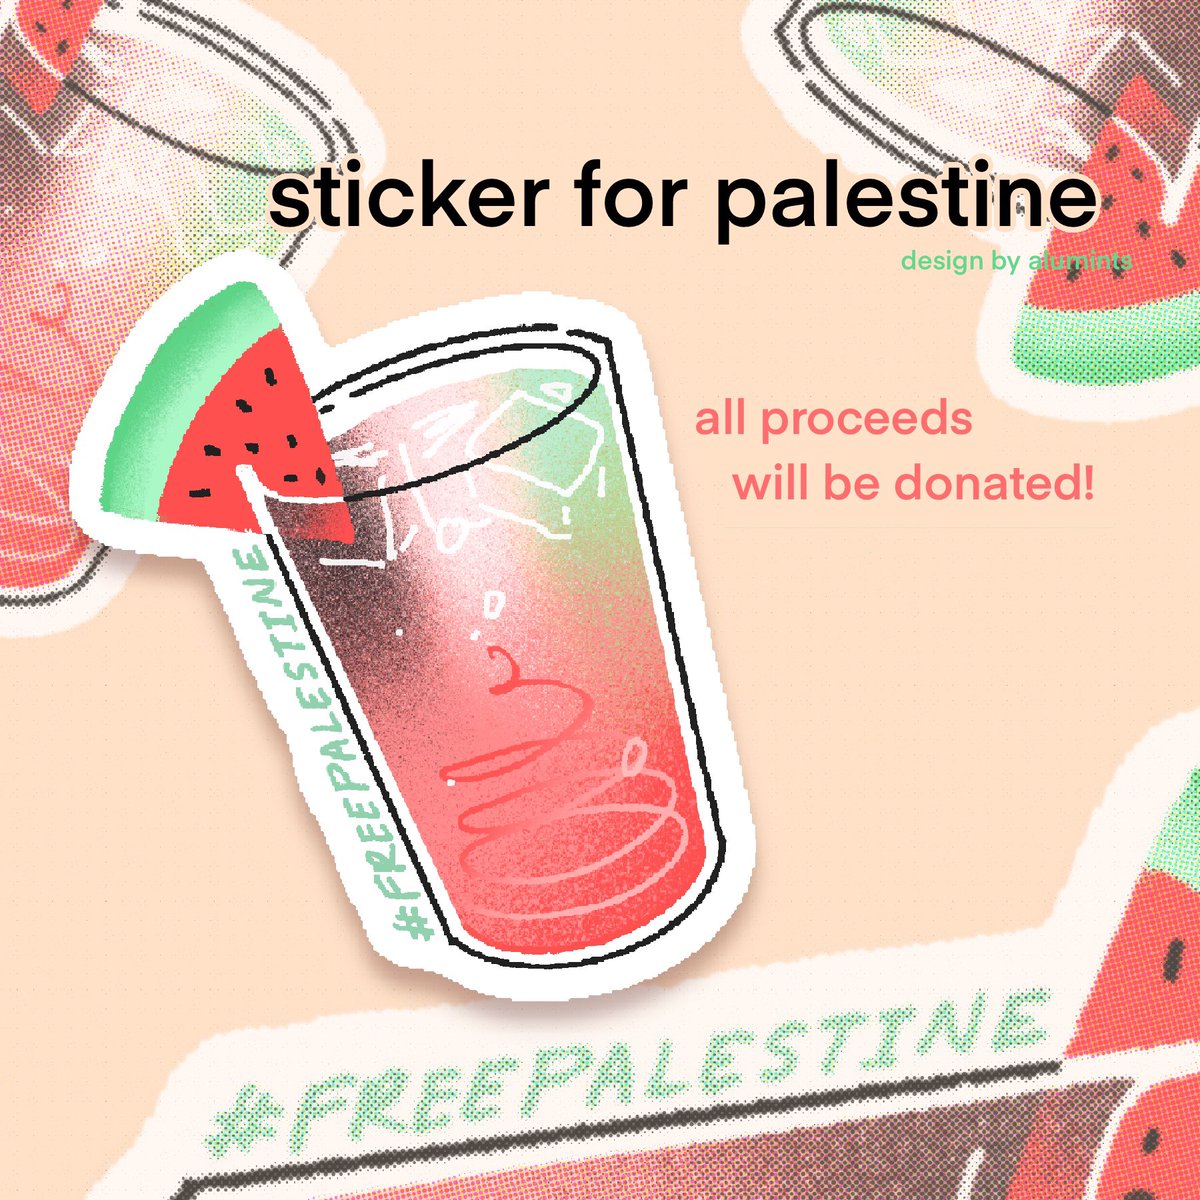 hey hey I'm selling a charity #FreePalestine sticker! All proceeds will be donated to CareForGaza when the preorder period is over. 🍉 alumints.com/product/preord…